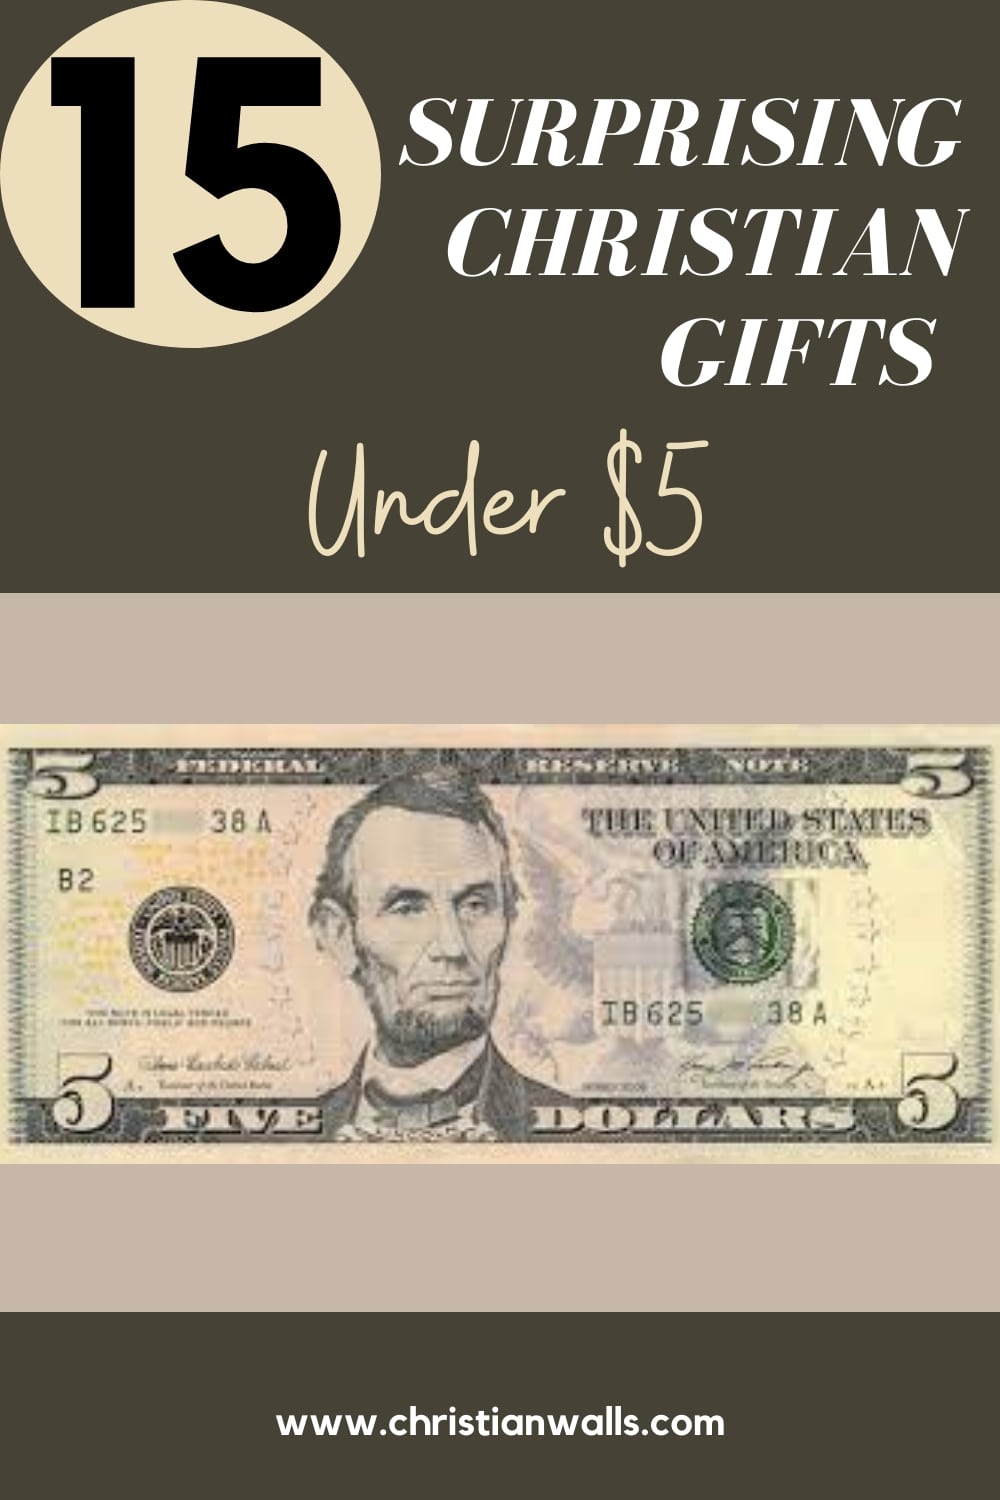 LAST MINUTE GIFT IDEAS UNDER $5!! CHRISTMAS DOLLAR TREE GIFT IDEAS YOU WILL  LOVE GIVING!! 